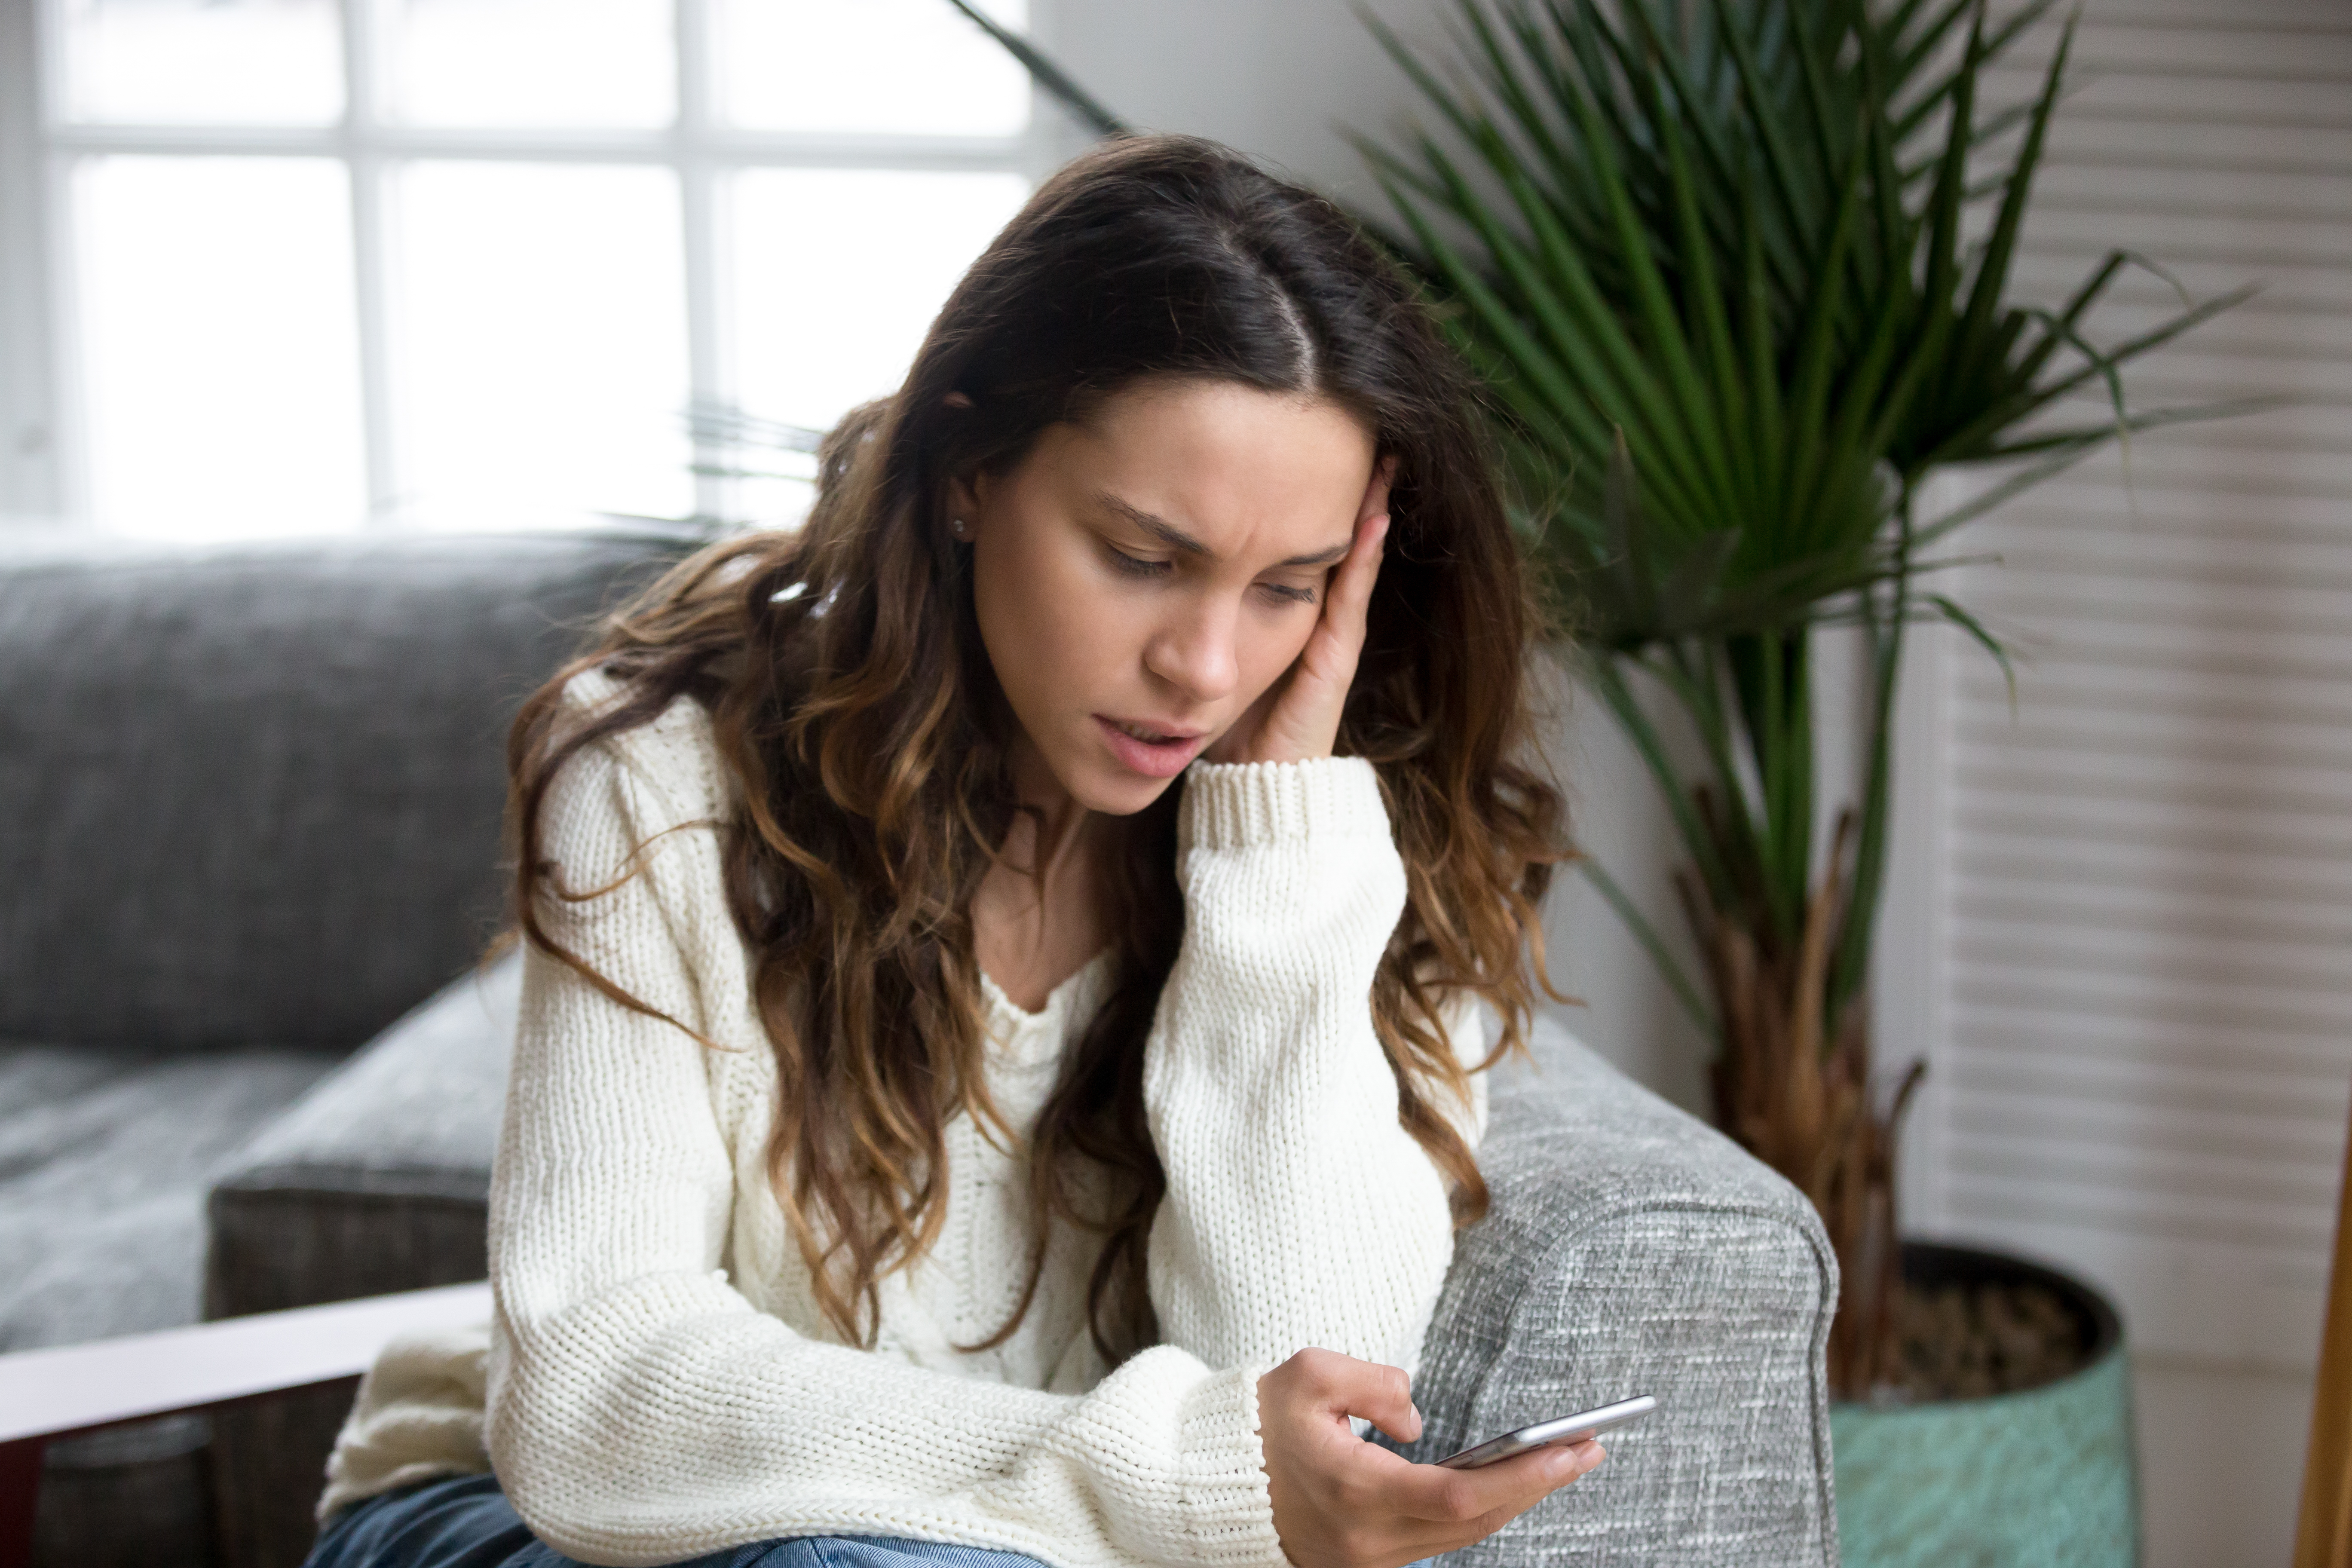 Woman feeling upset while reading messages on a smartphone | Source: Shutterstock